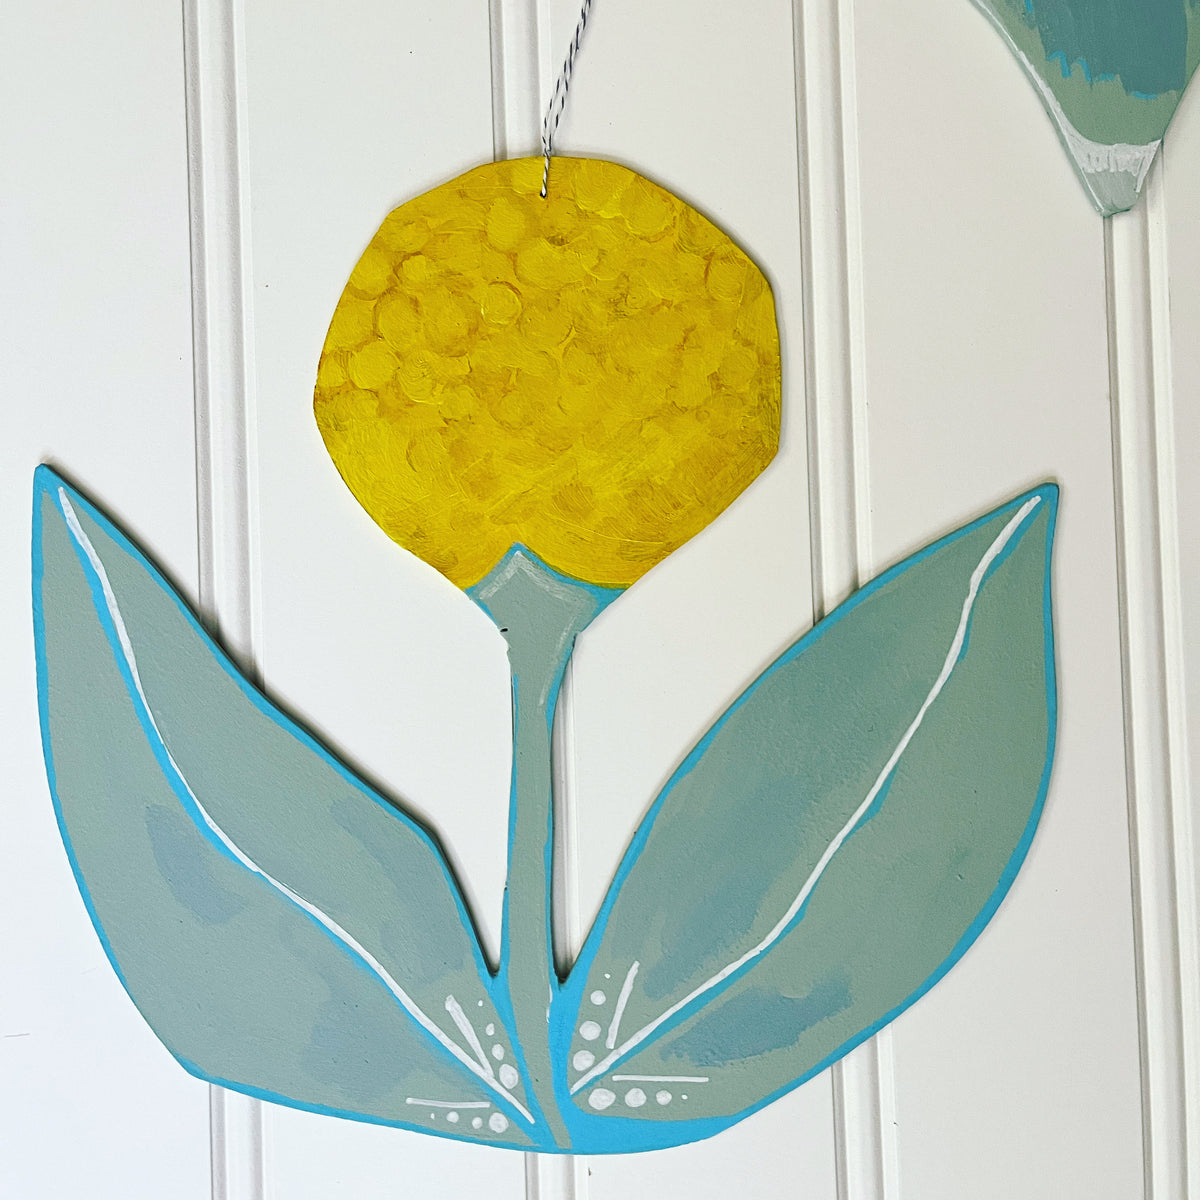 cutout wooden flower painting, by artist Abigail Gray Swartz. Small yellow flower, acrylic on panel.